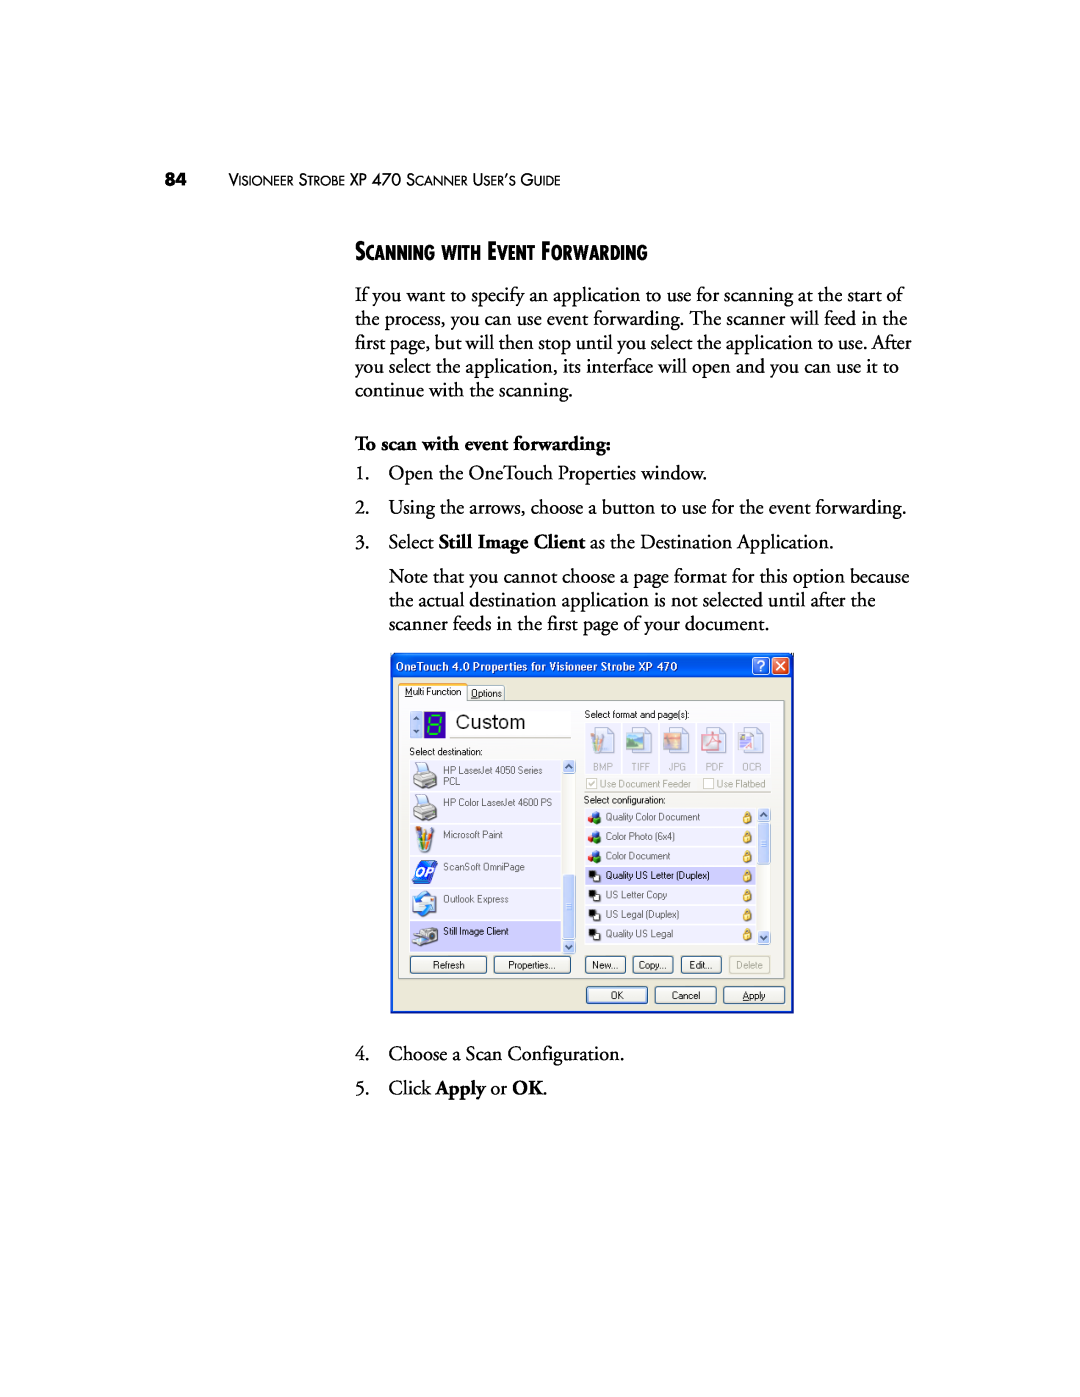 Visioneer XP 470 manual Scanning With Event Forwarding, To scan with event forwarding 